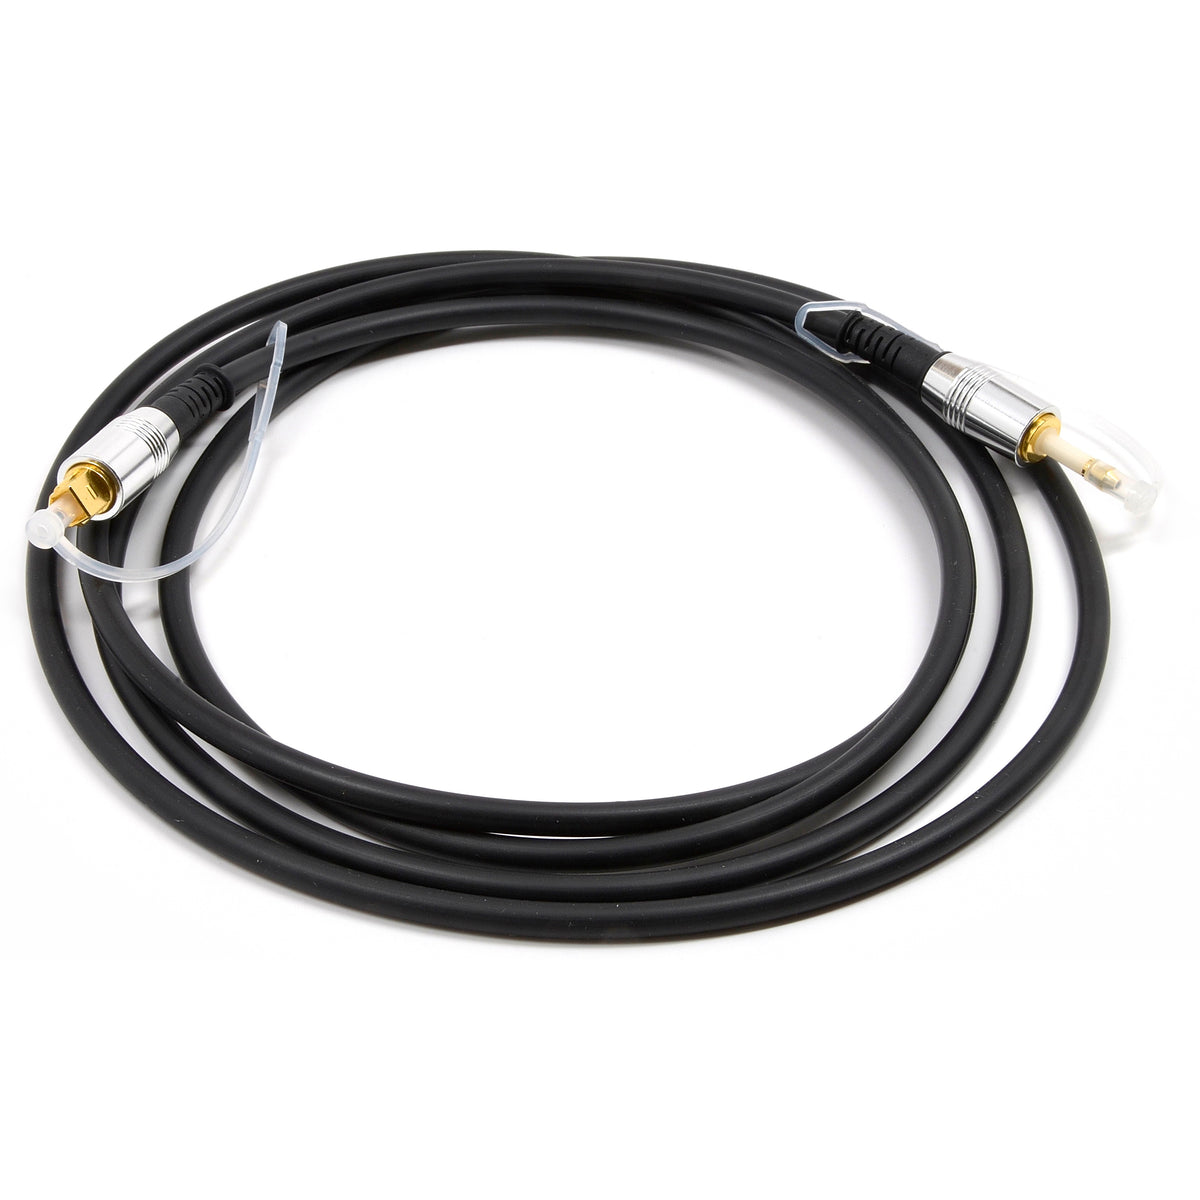 TOSLINK Optical Cable with Metal Connectors for Digital Audio - Benchmark  Media Systems